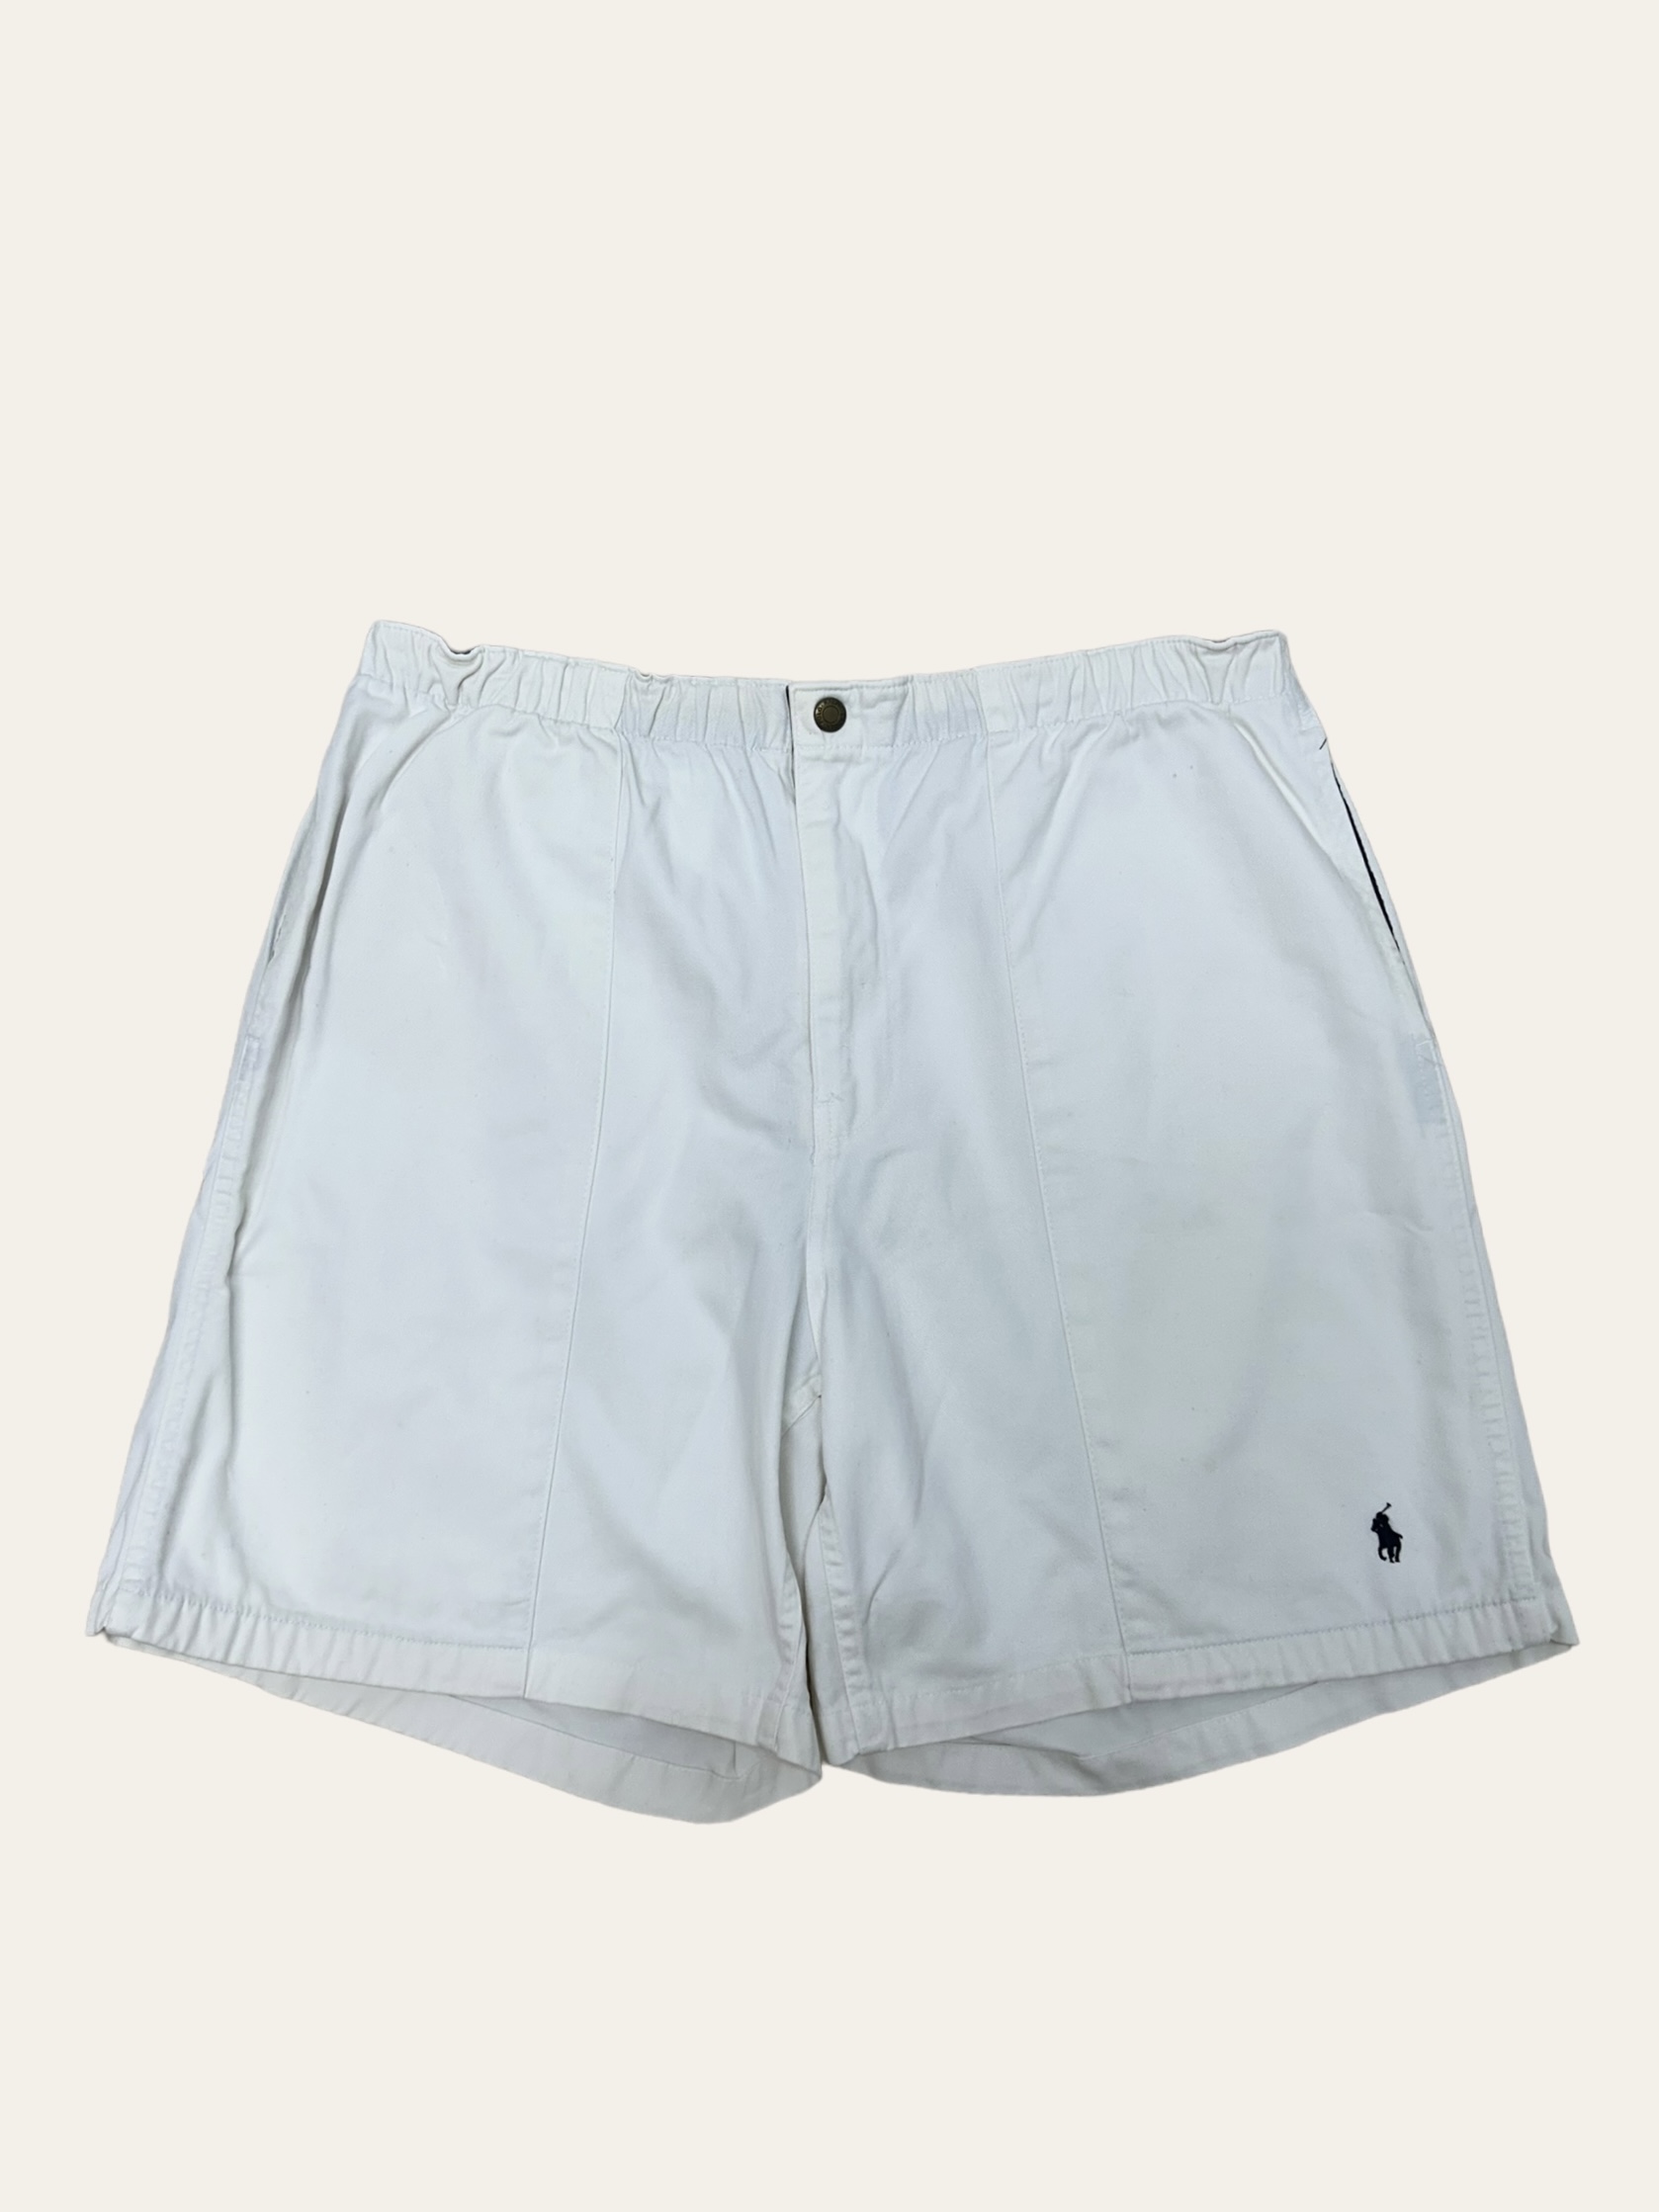 Polo ralph lauren white prepster shorts 32 ~ 33 Made in USA